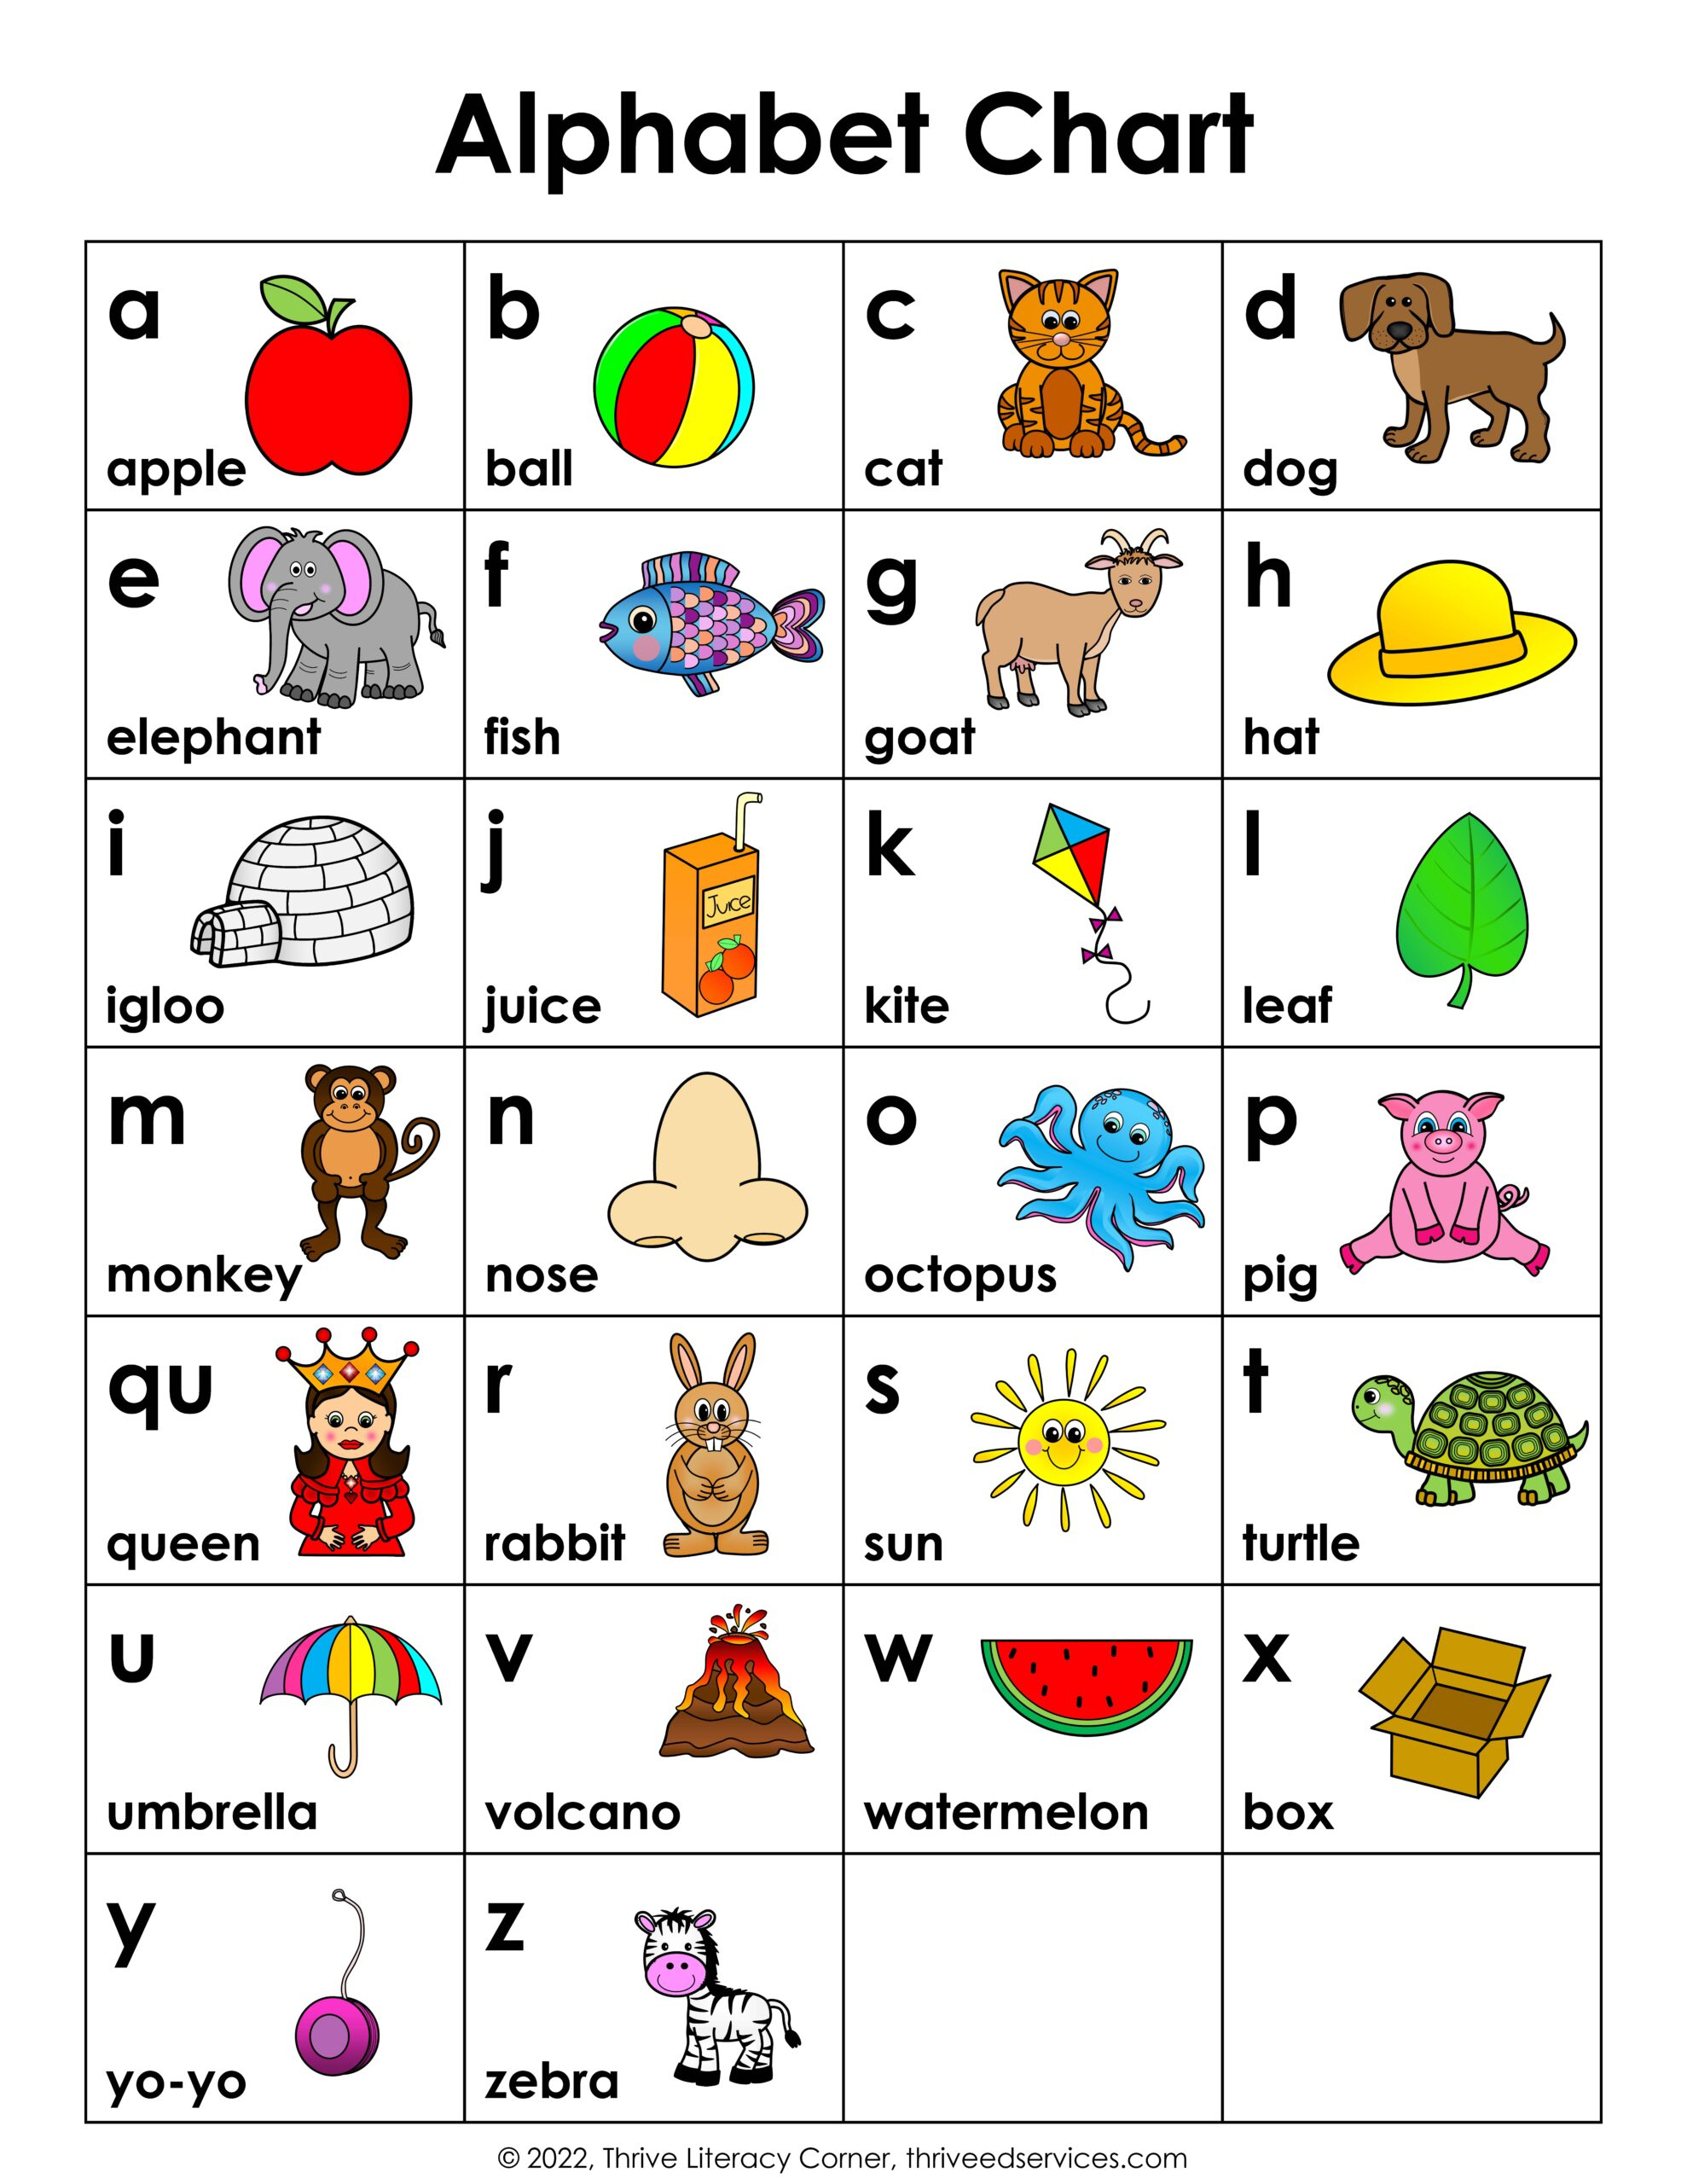 Abc Chart: How To Use An Alphabet Chart + Free Printable with regard to Free Printable Alphabet Chart